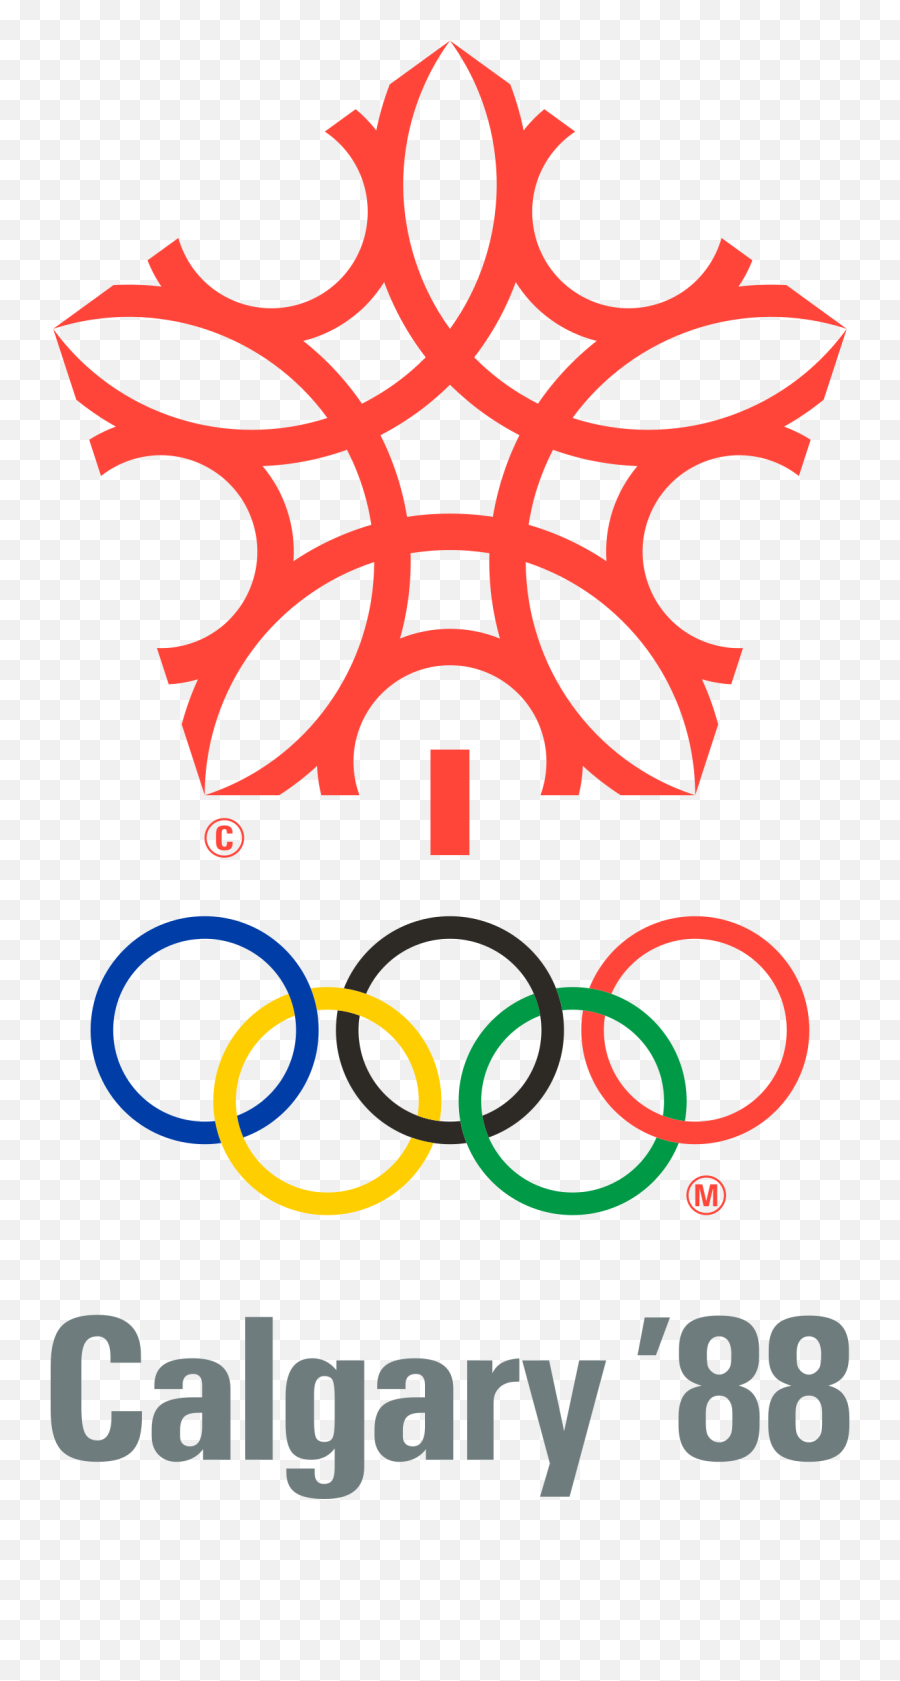 1988 Winter Olympics - Calgary 1988 Olympics Emoji,Text Emoticons Group Meaning Smile Flower Thumbs Up